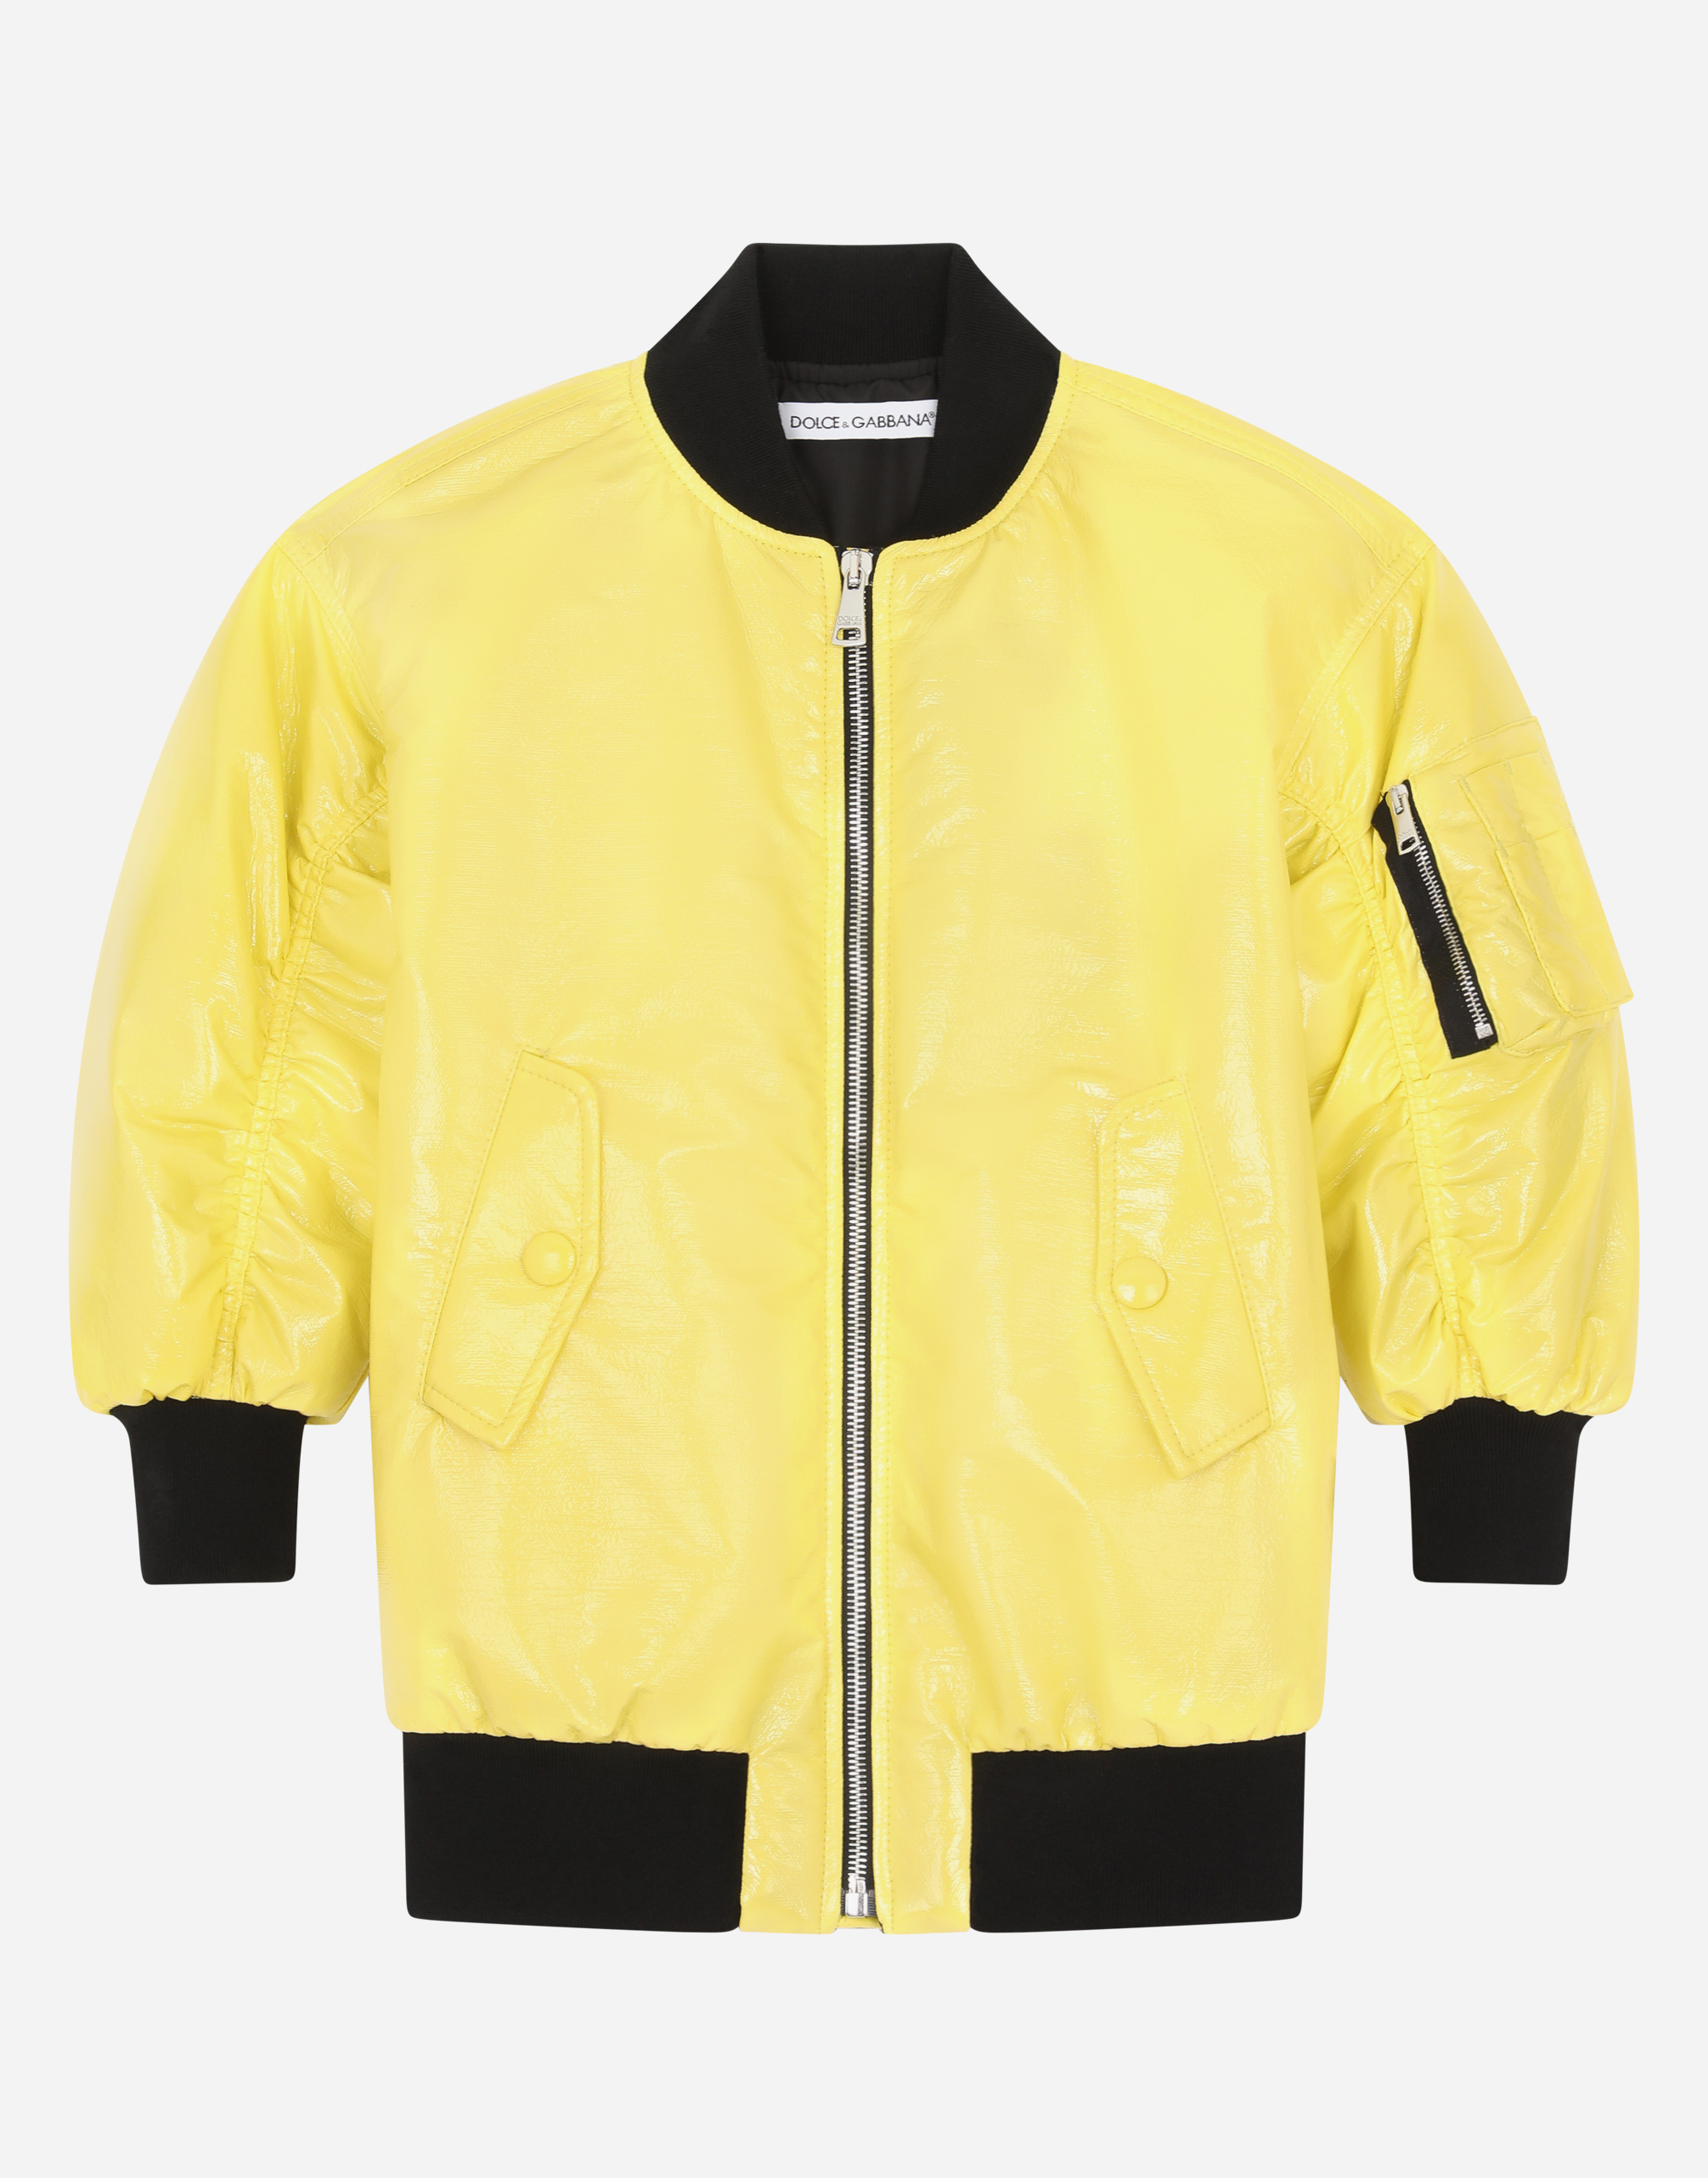 Patent leather jacket in Yellow